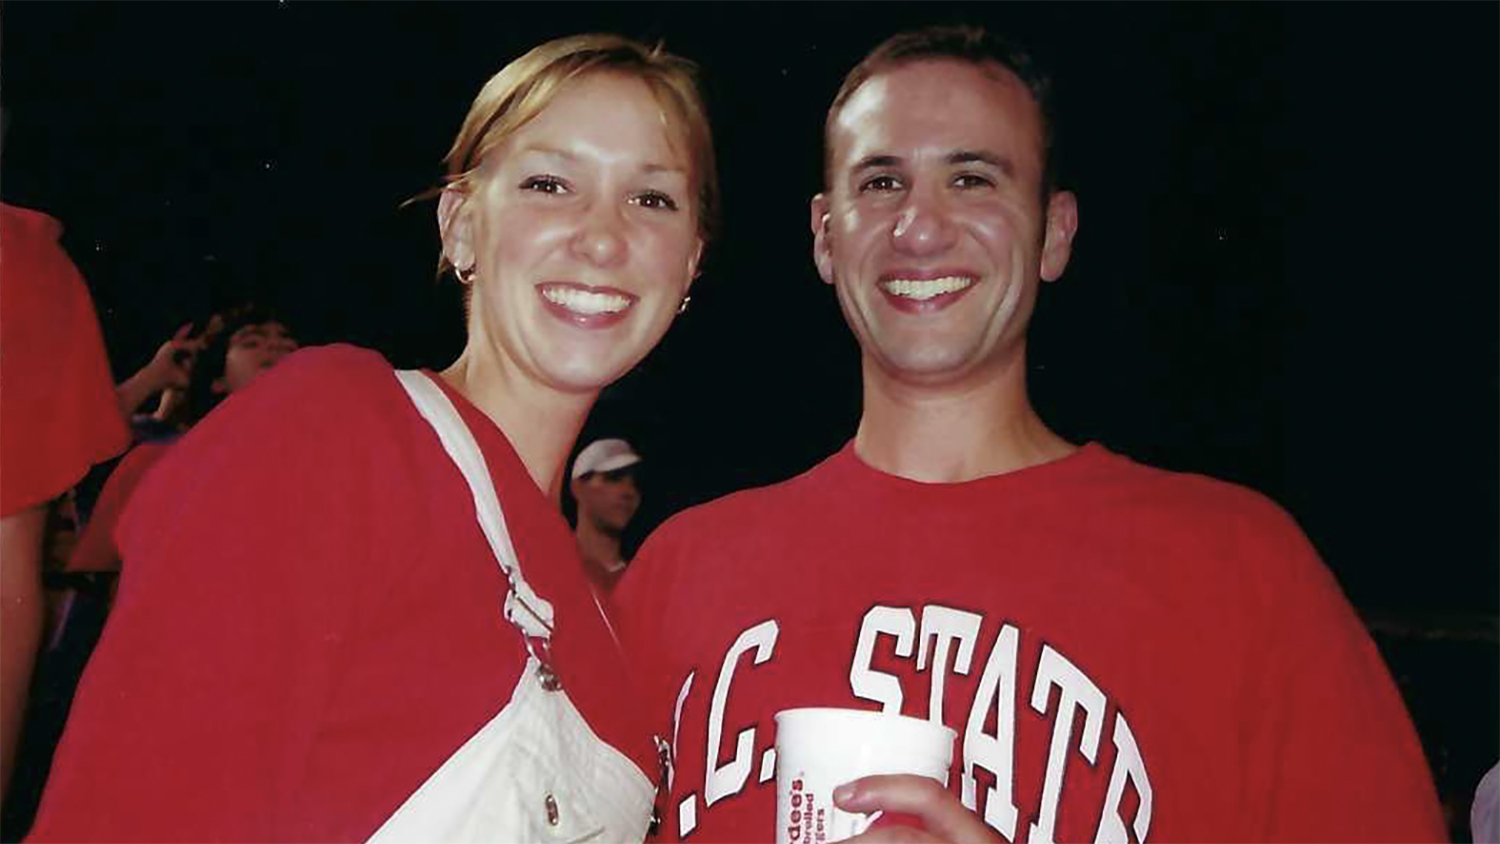 a woman and man wearing red shirts